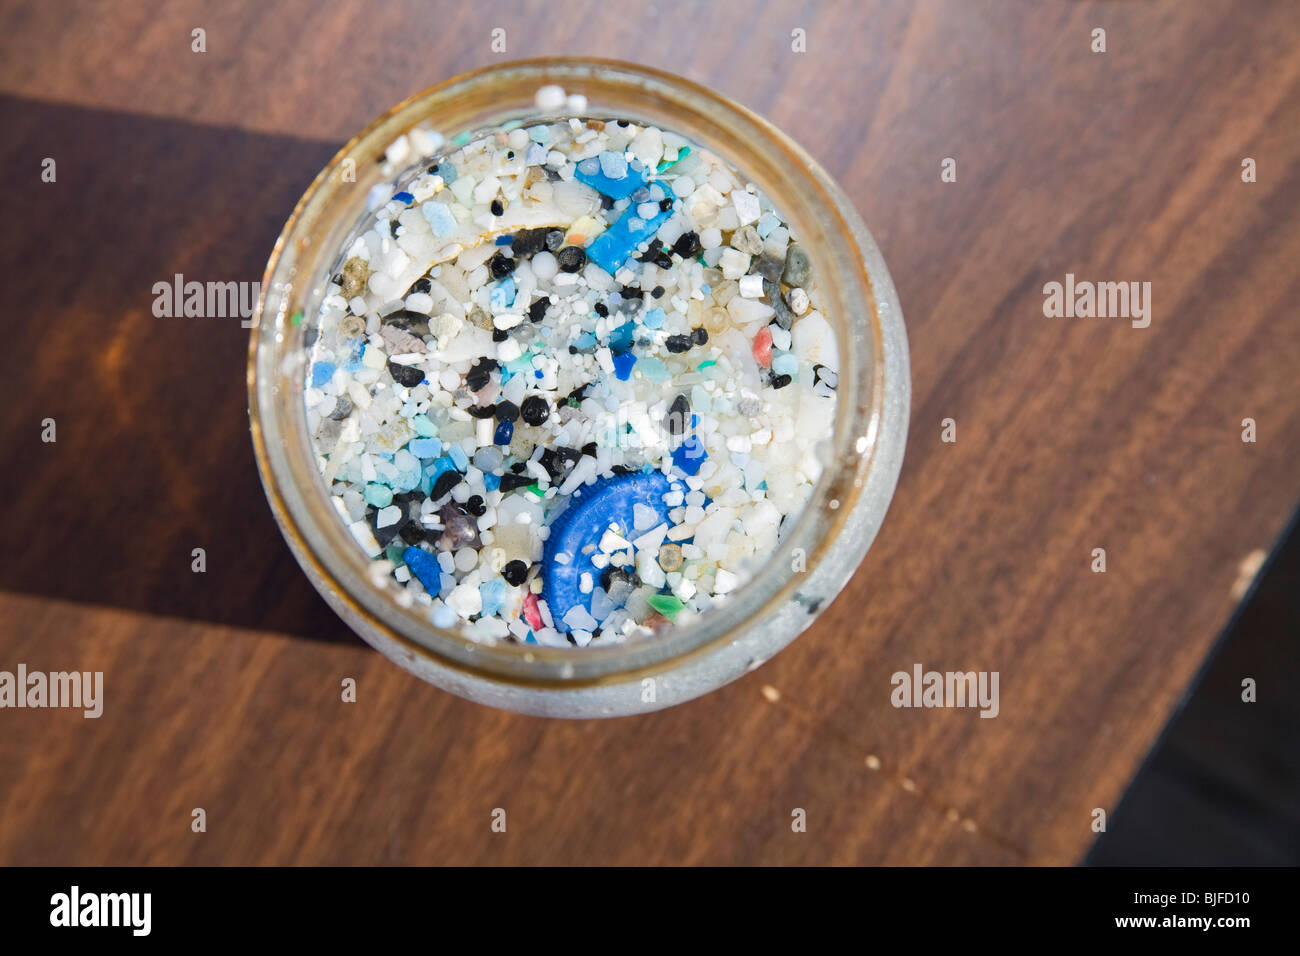 Plastic sample jars taken from trawls from the “great Pacific garbage patch'.  Long Beach, California, USA Stock Photo